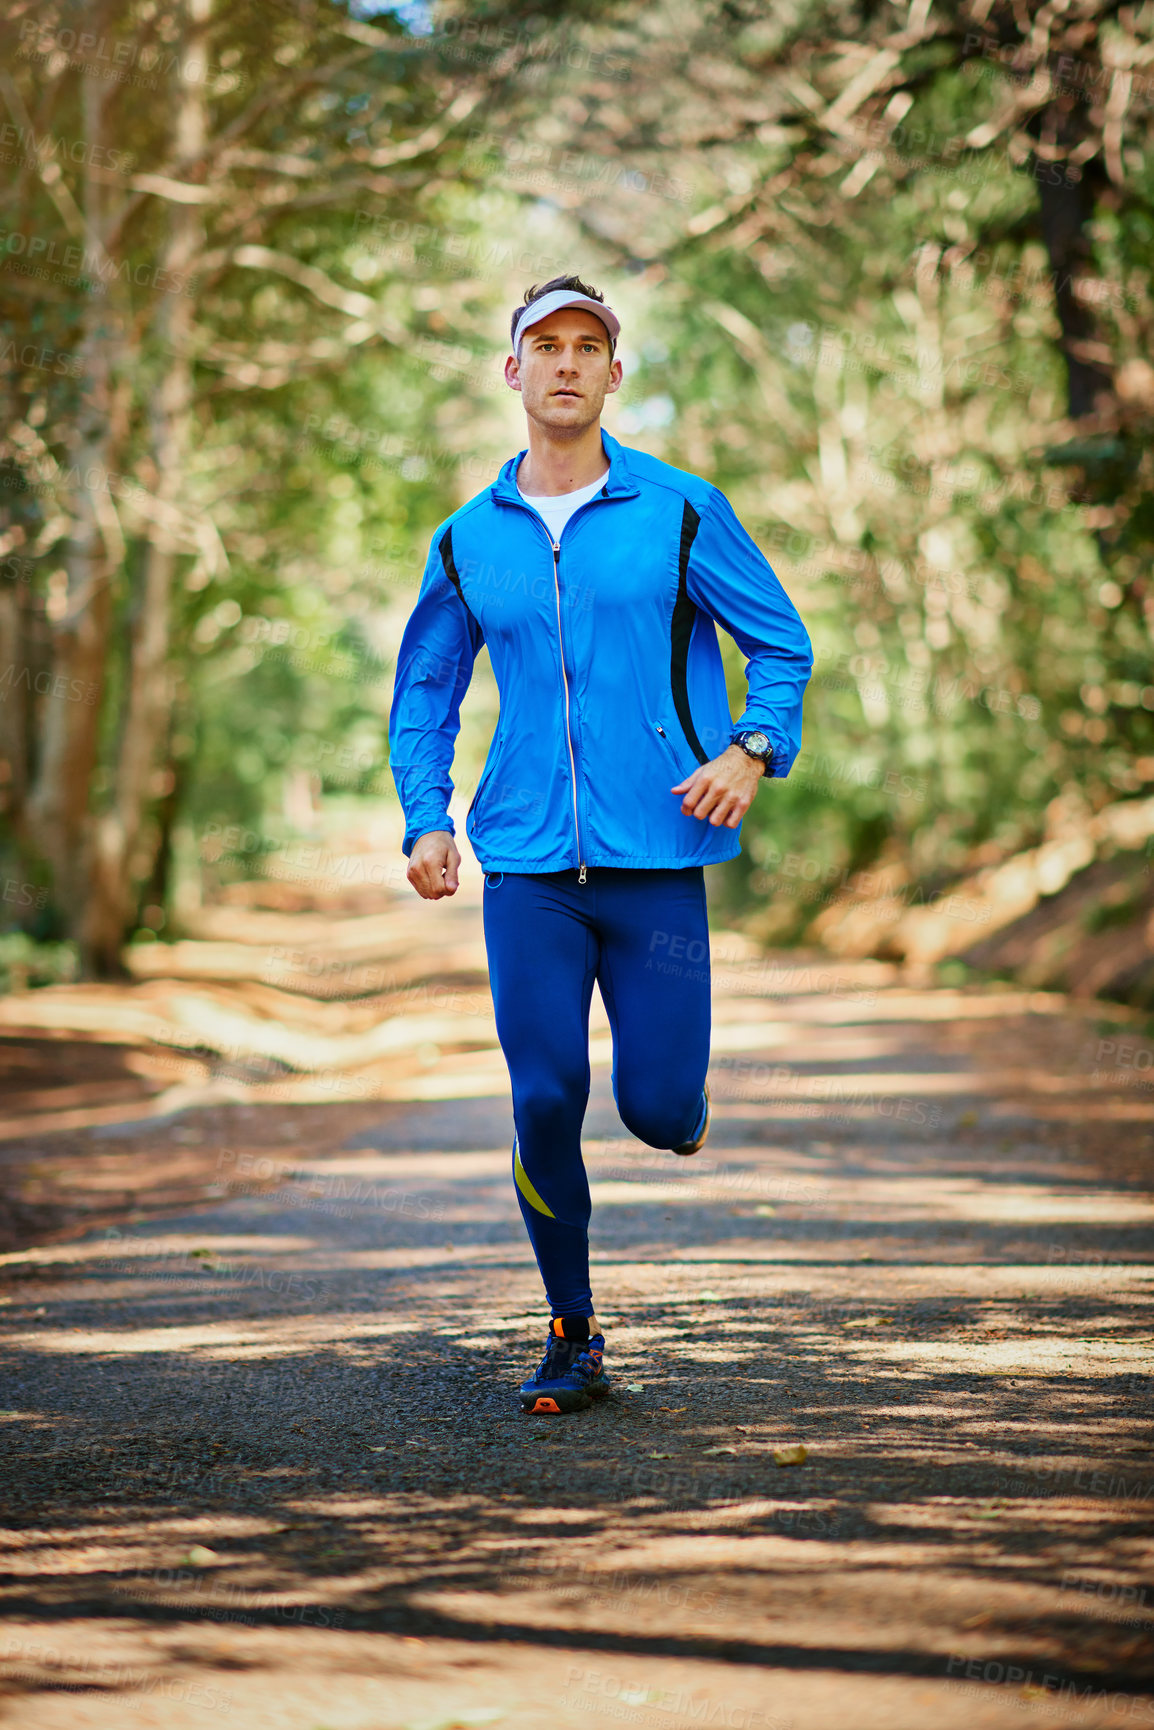 Buy stock photo Shot of a young man running along a trail